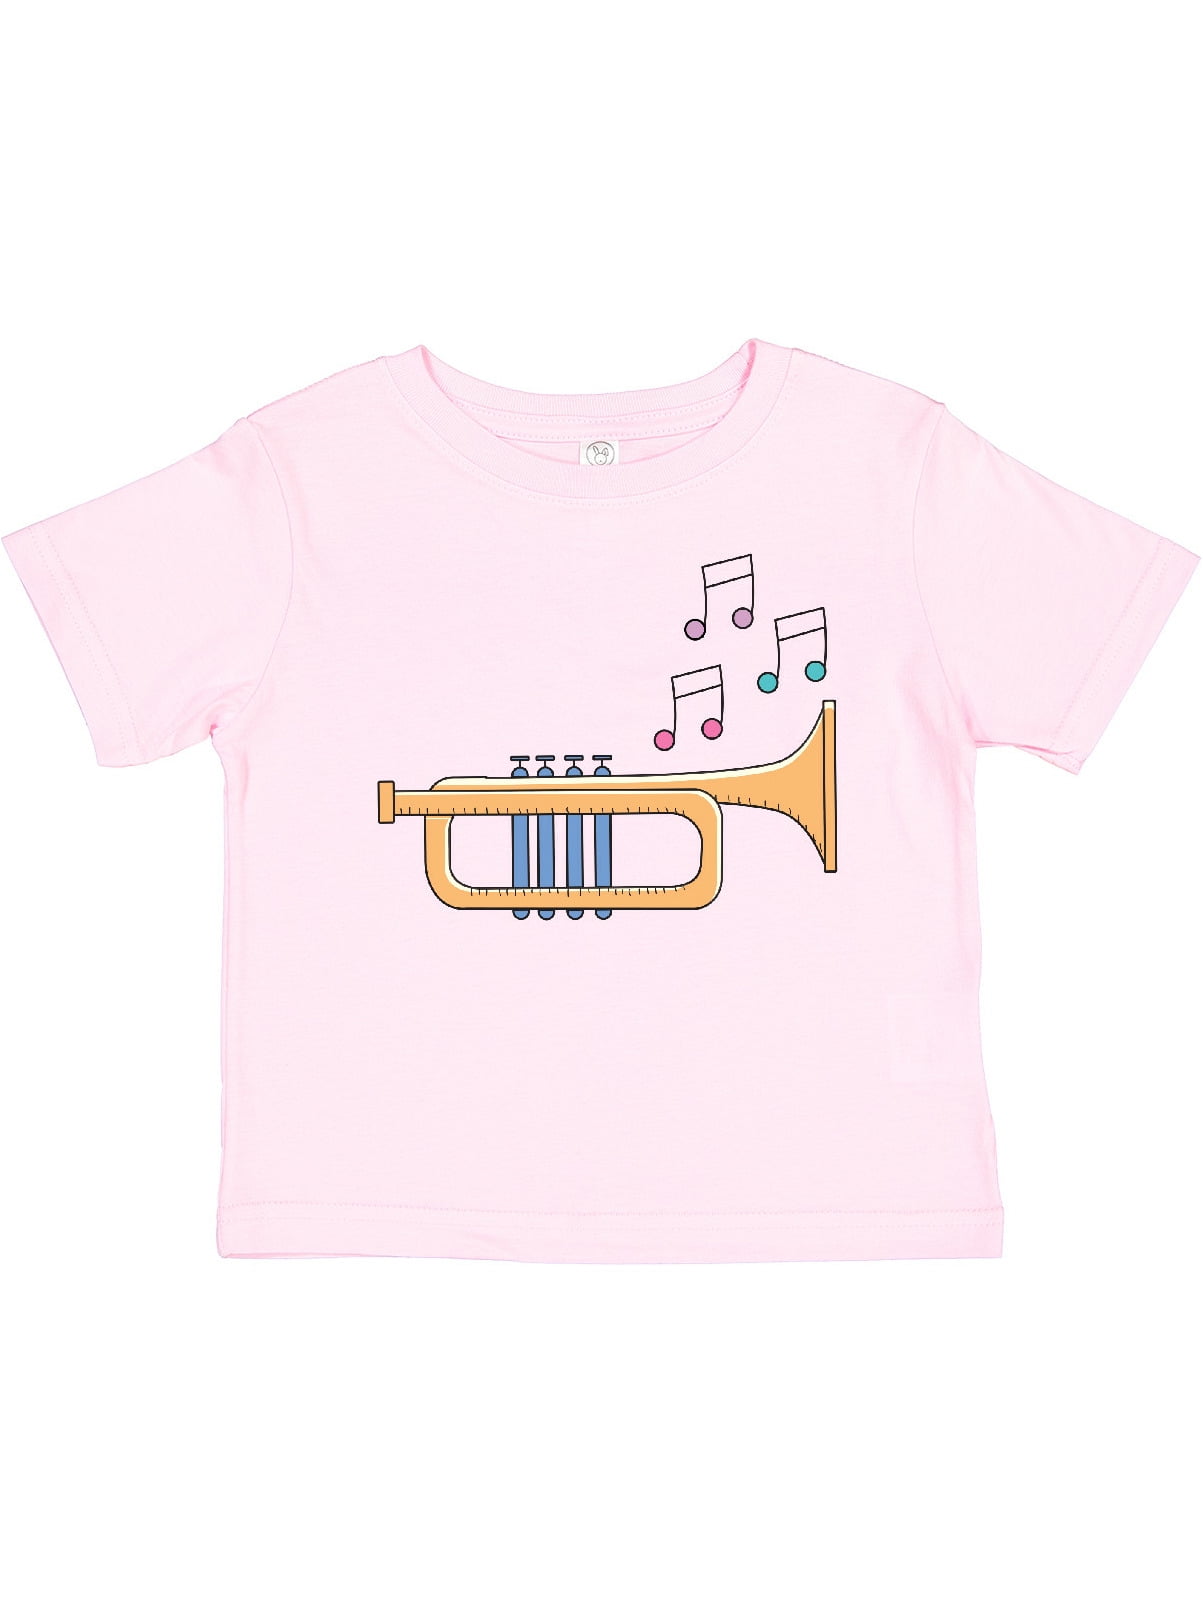 inktastic Cute Trumpet Music Gift Baby T-Shirt 